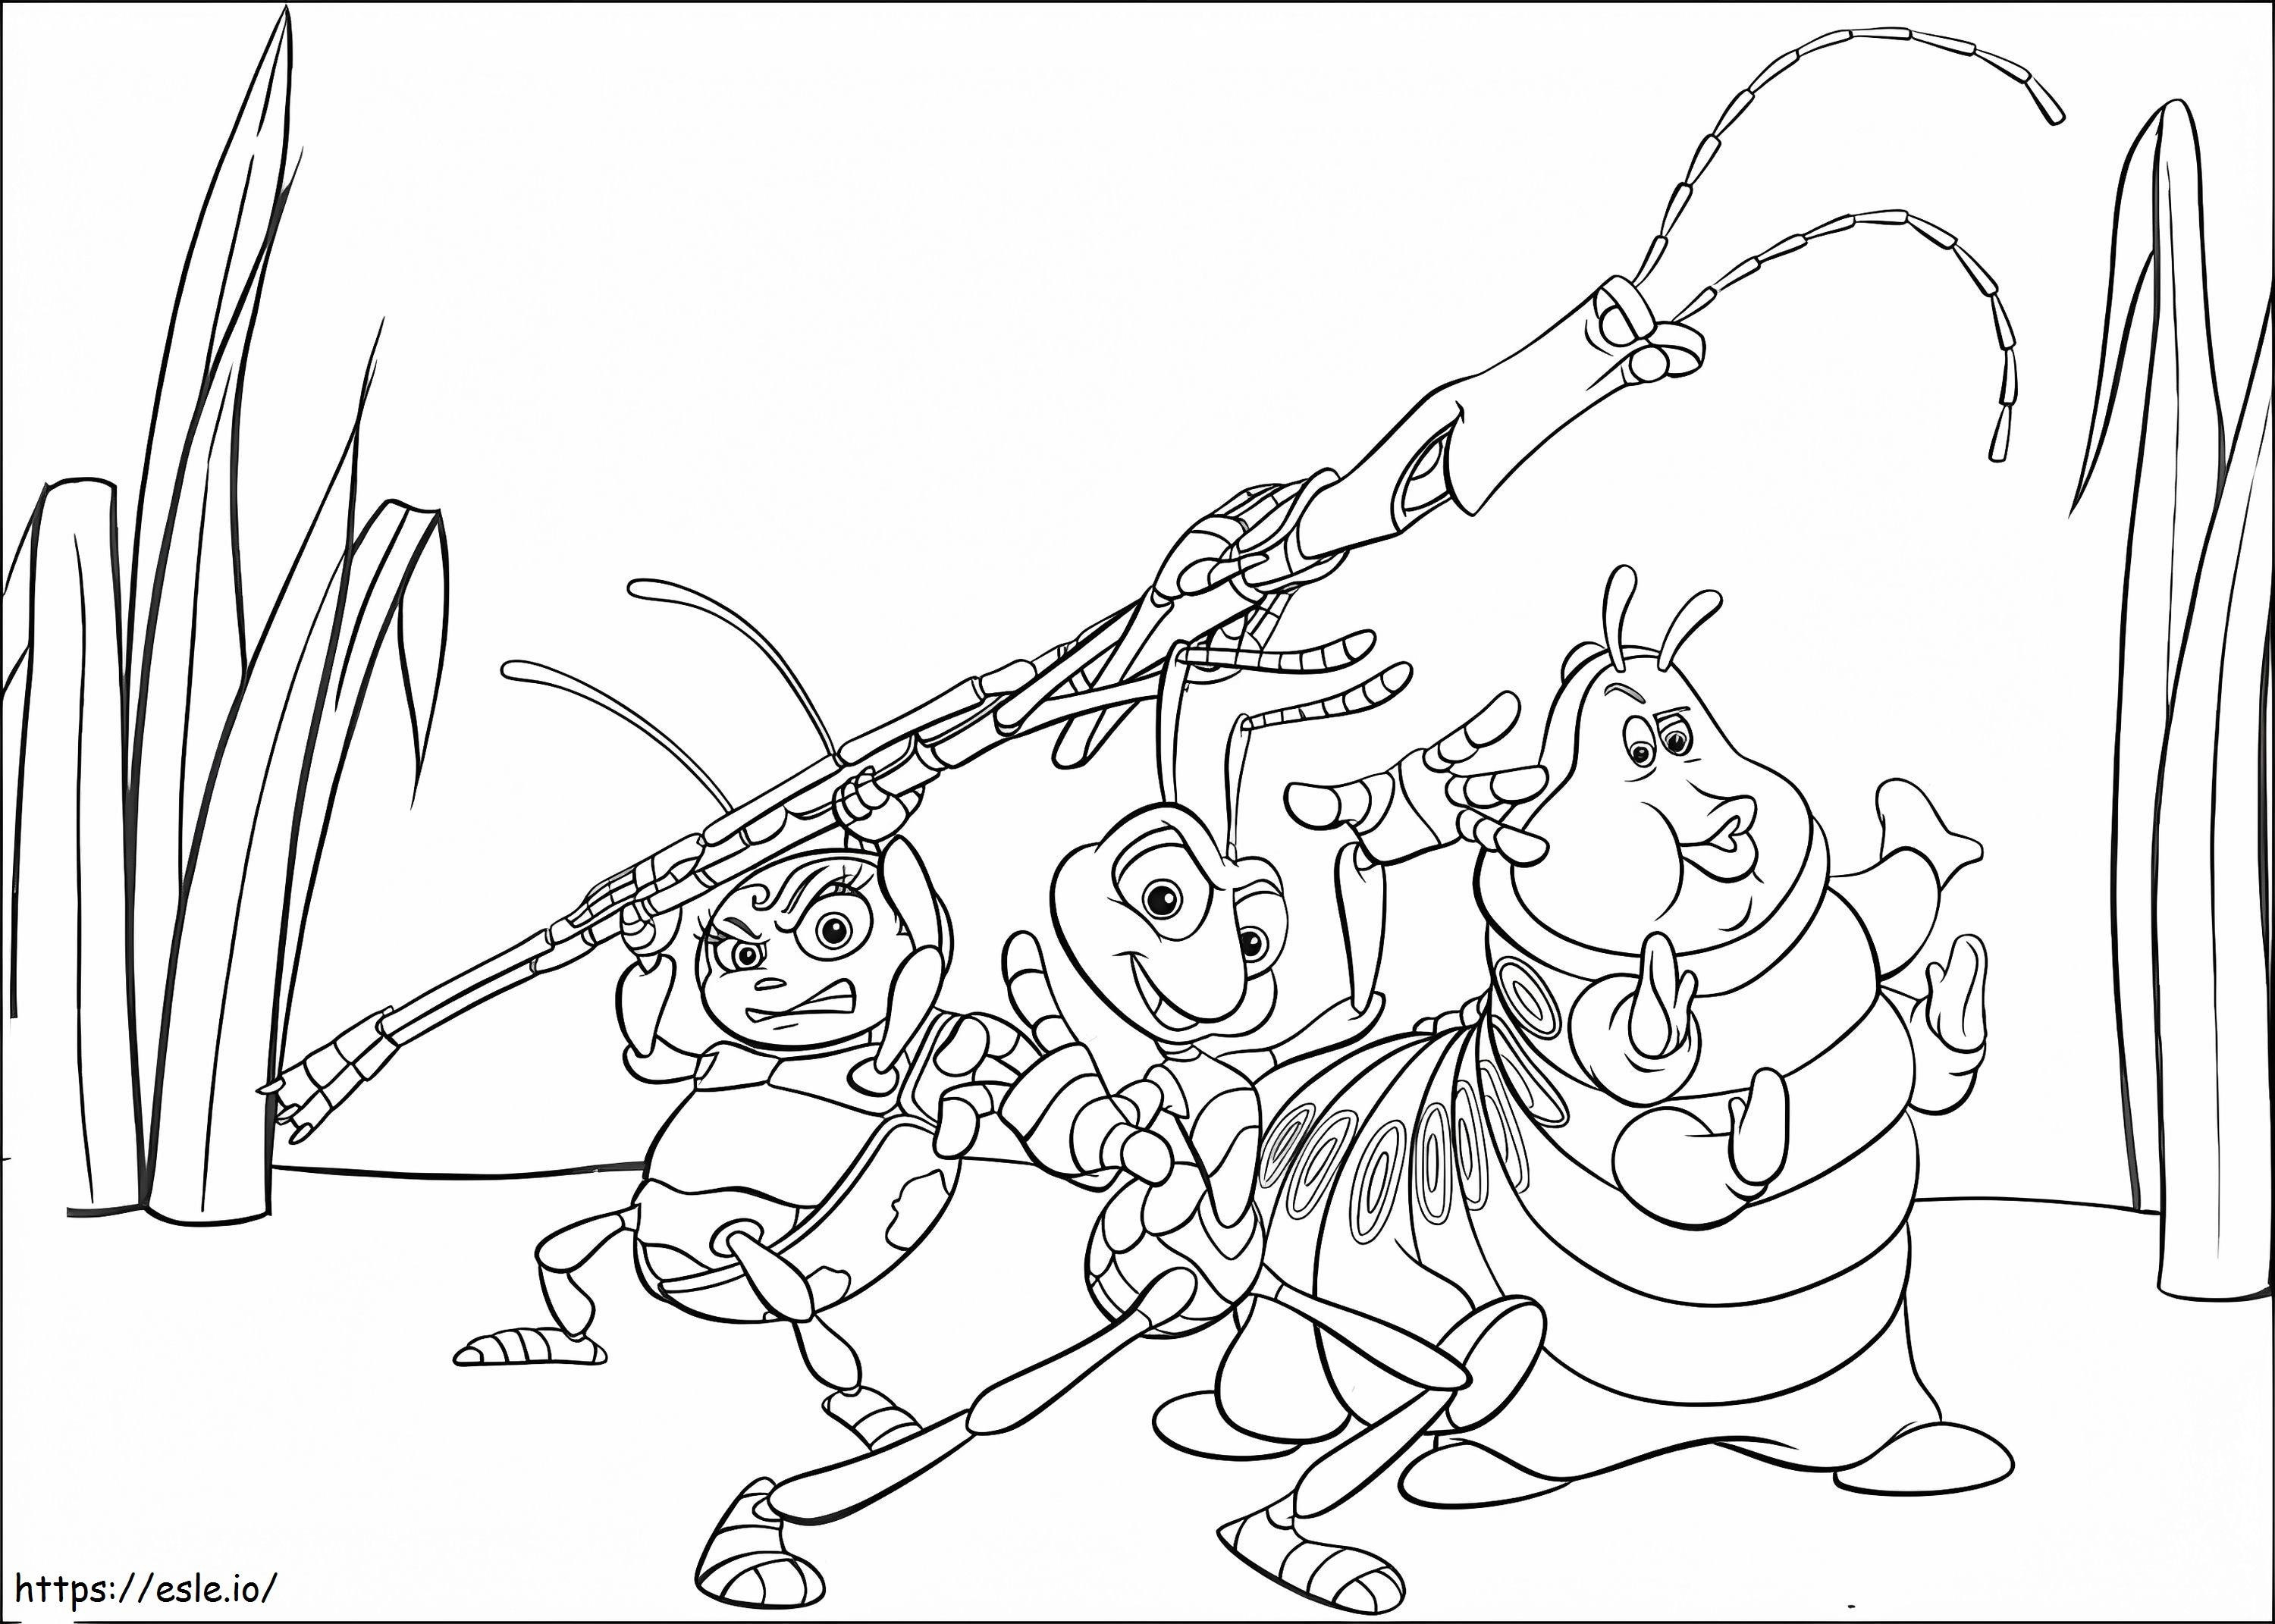 1599611062 A Bugs Life coloring page